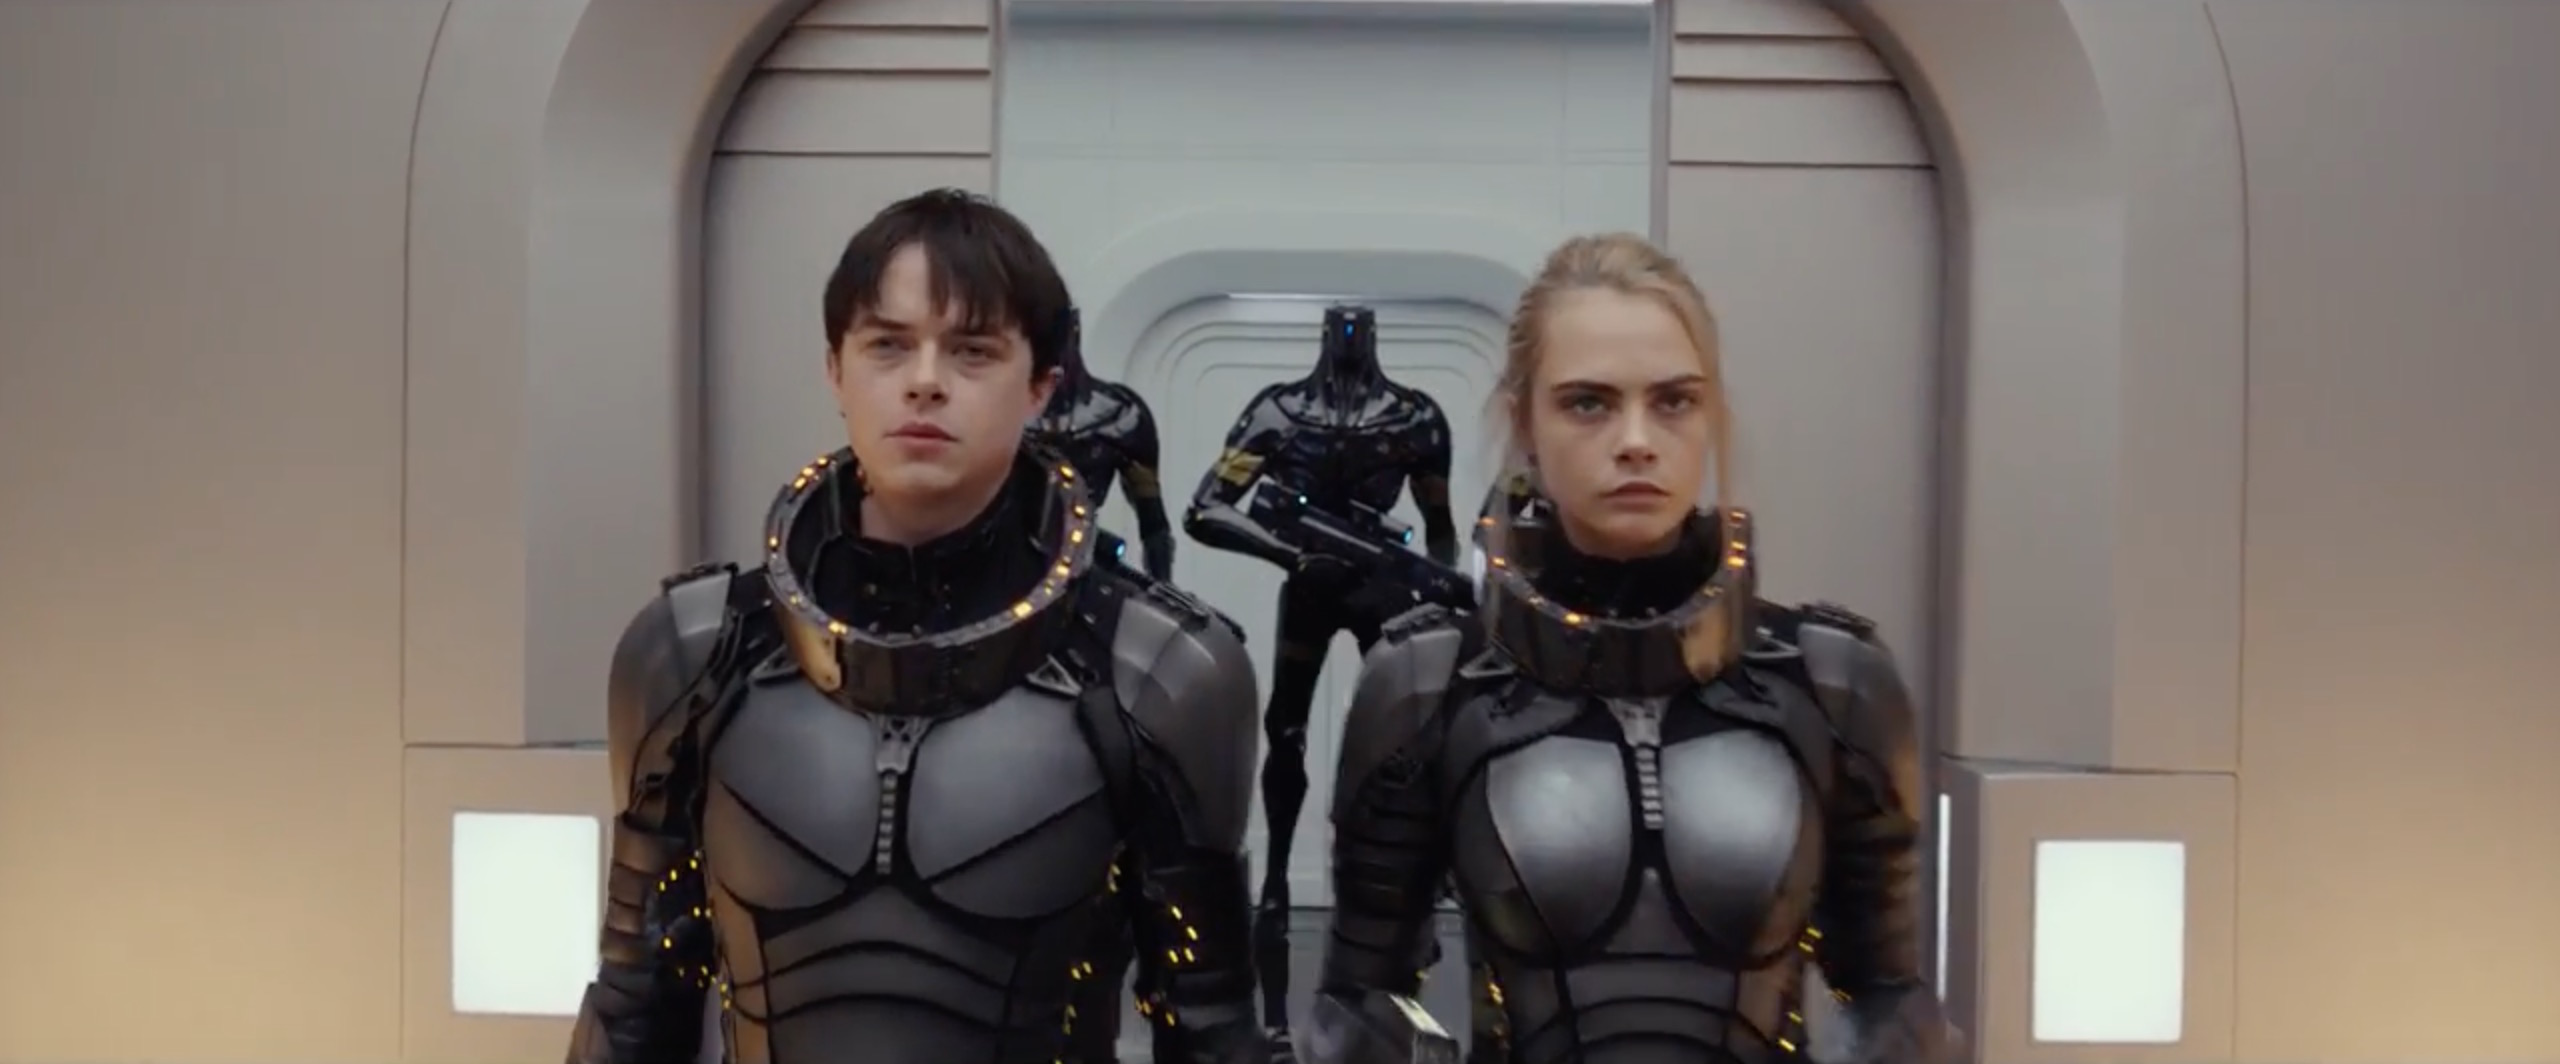 Valerian and the City of the Thousand Planets Trailer